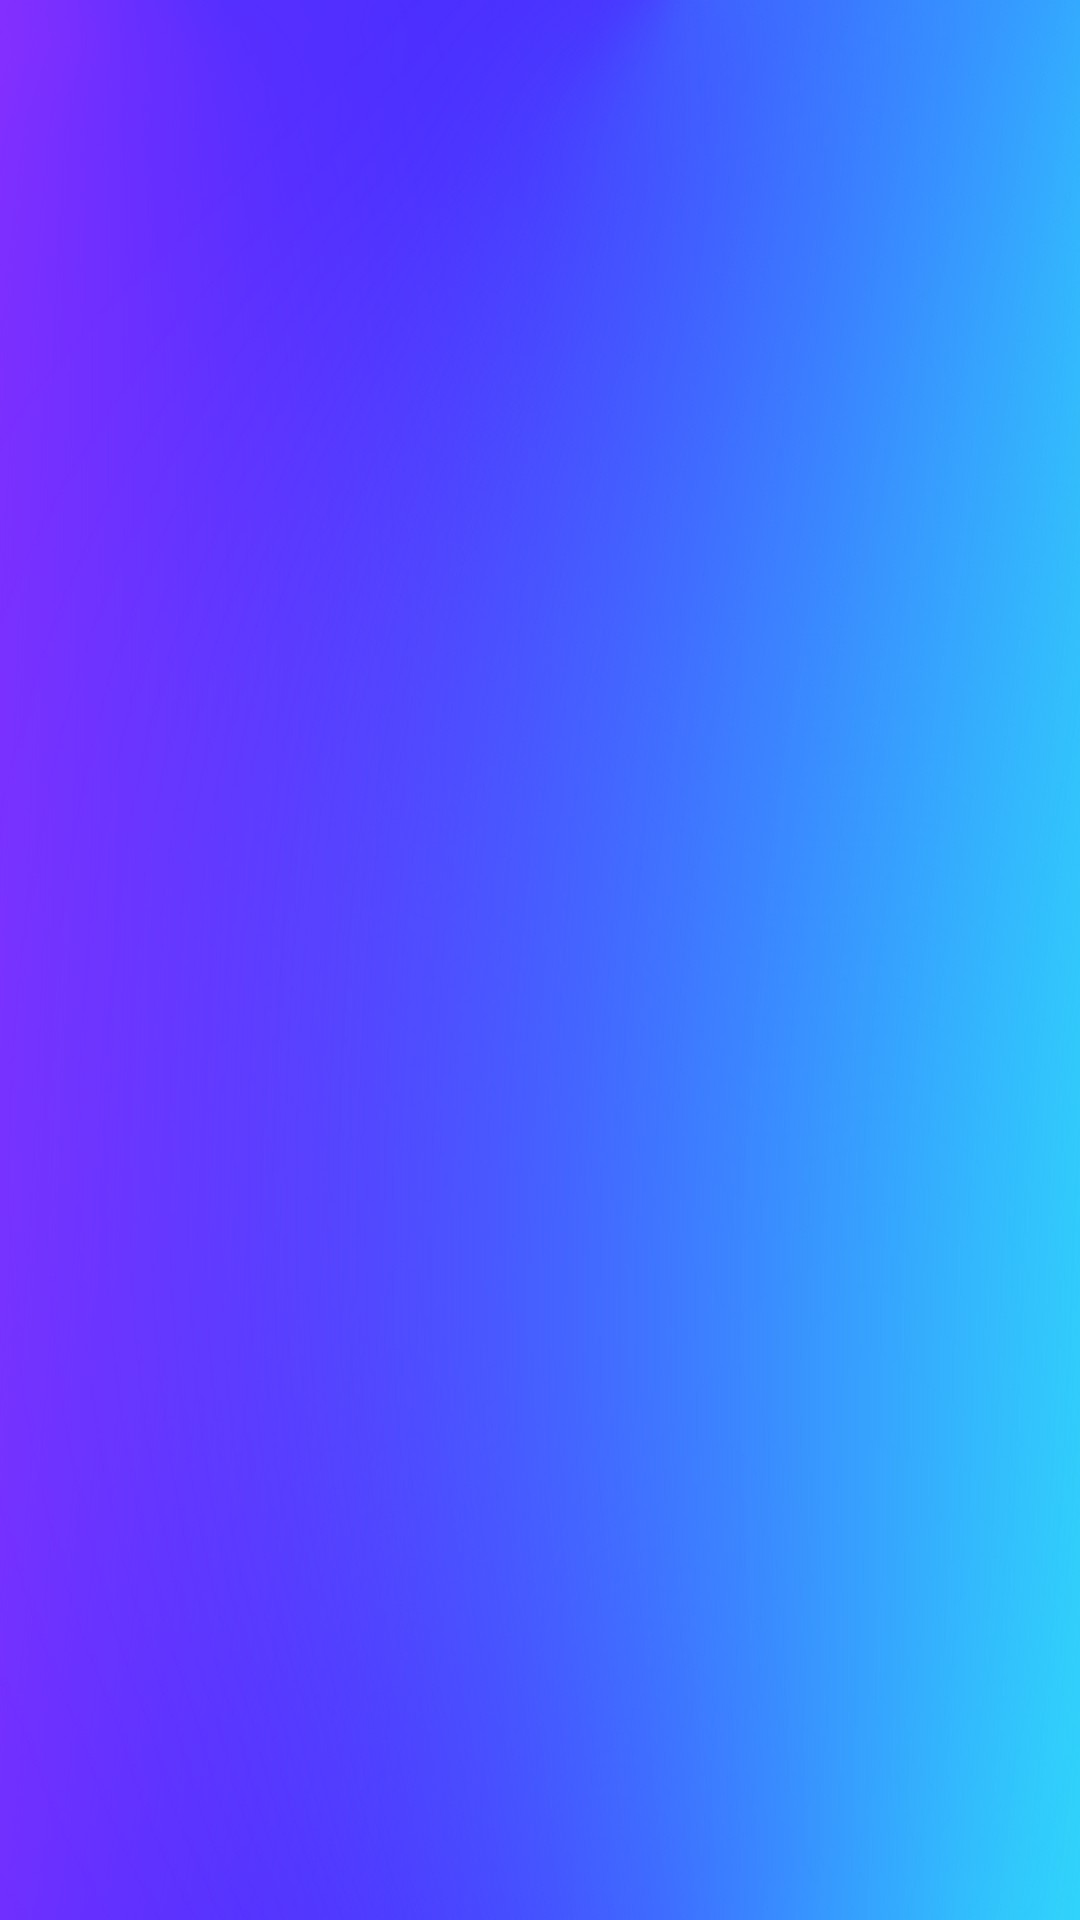 Gradient iPhone 8 Wallpaper With high-resolution 1080X1920 pixel. You can use this wallpaper for your iPhone 5, 6, 7, 8, X, XS, XR backgrounds, Mobile Screensaver, or iPad Lock Screen